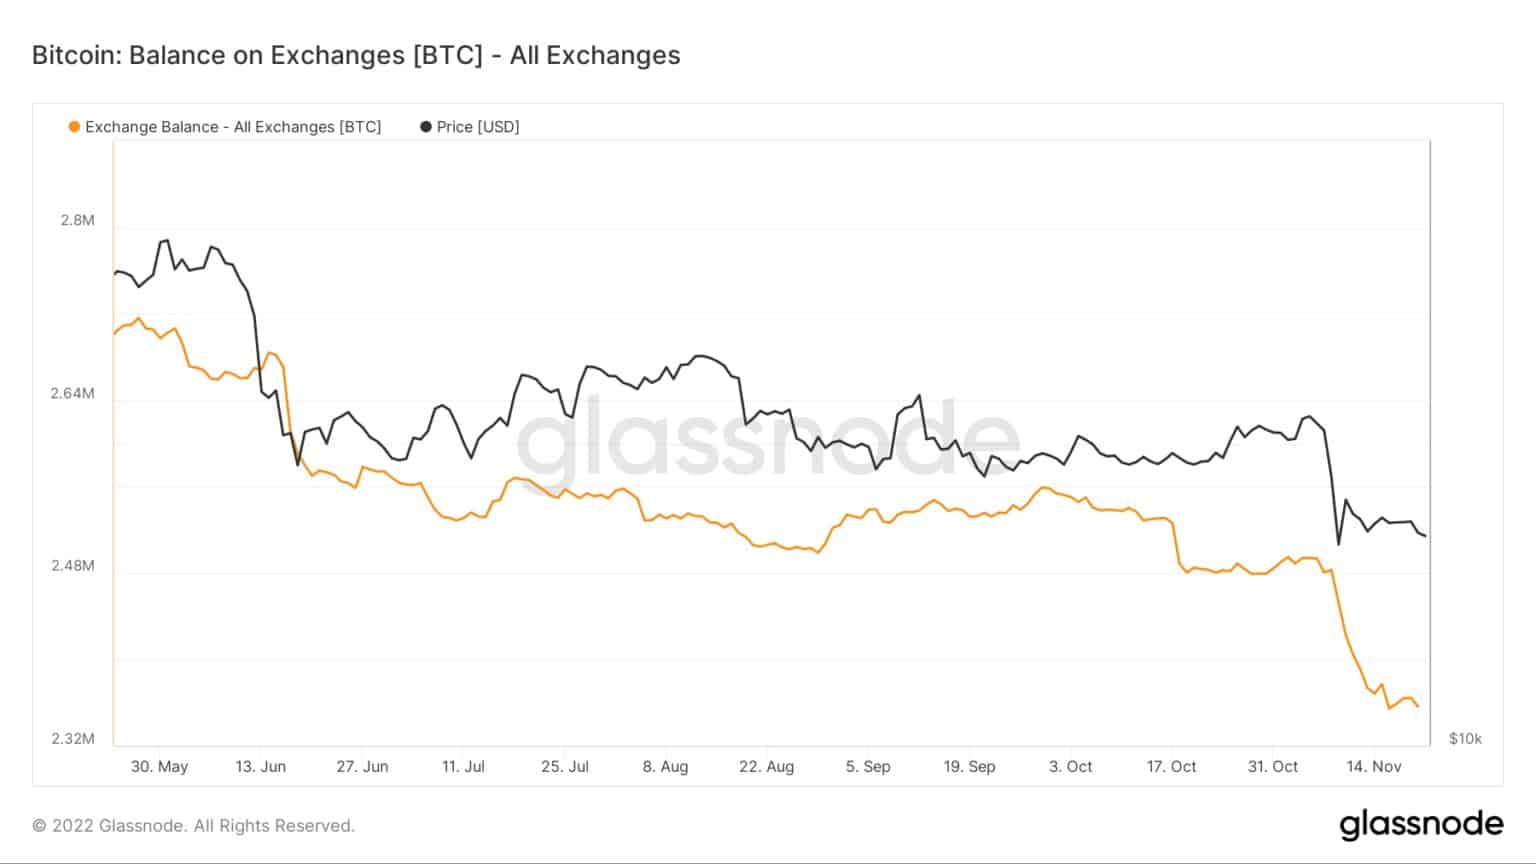 Bitcoin: Balance on Exchanges - All Exchanges (Fonte: Glassnode)